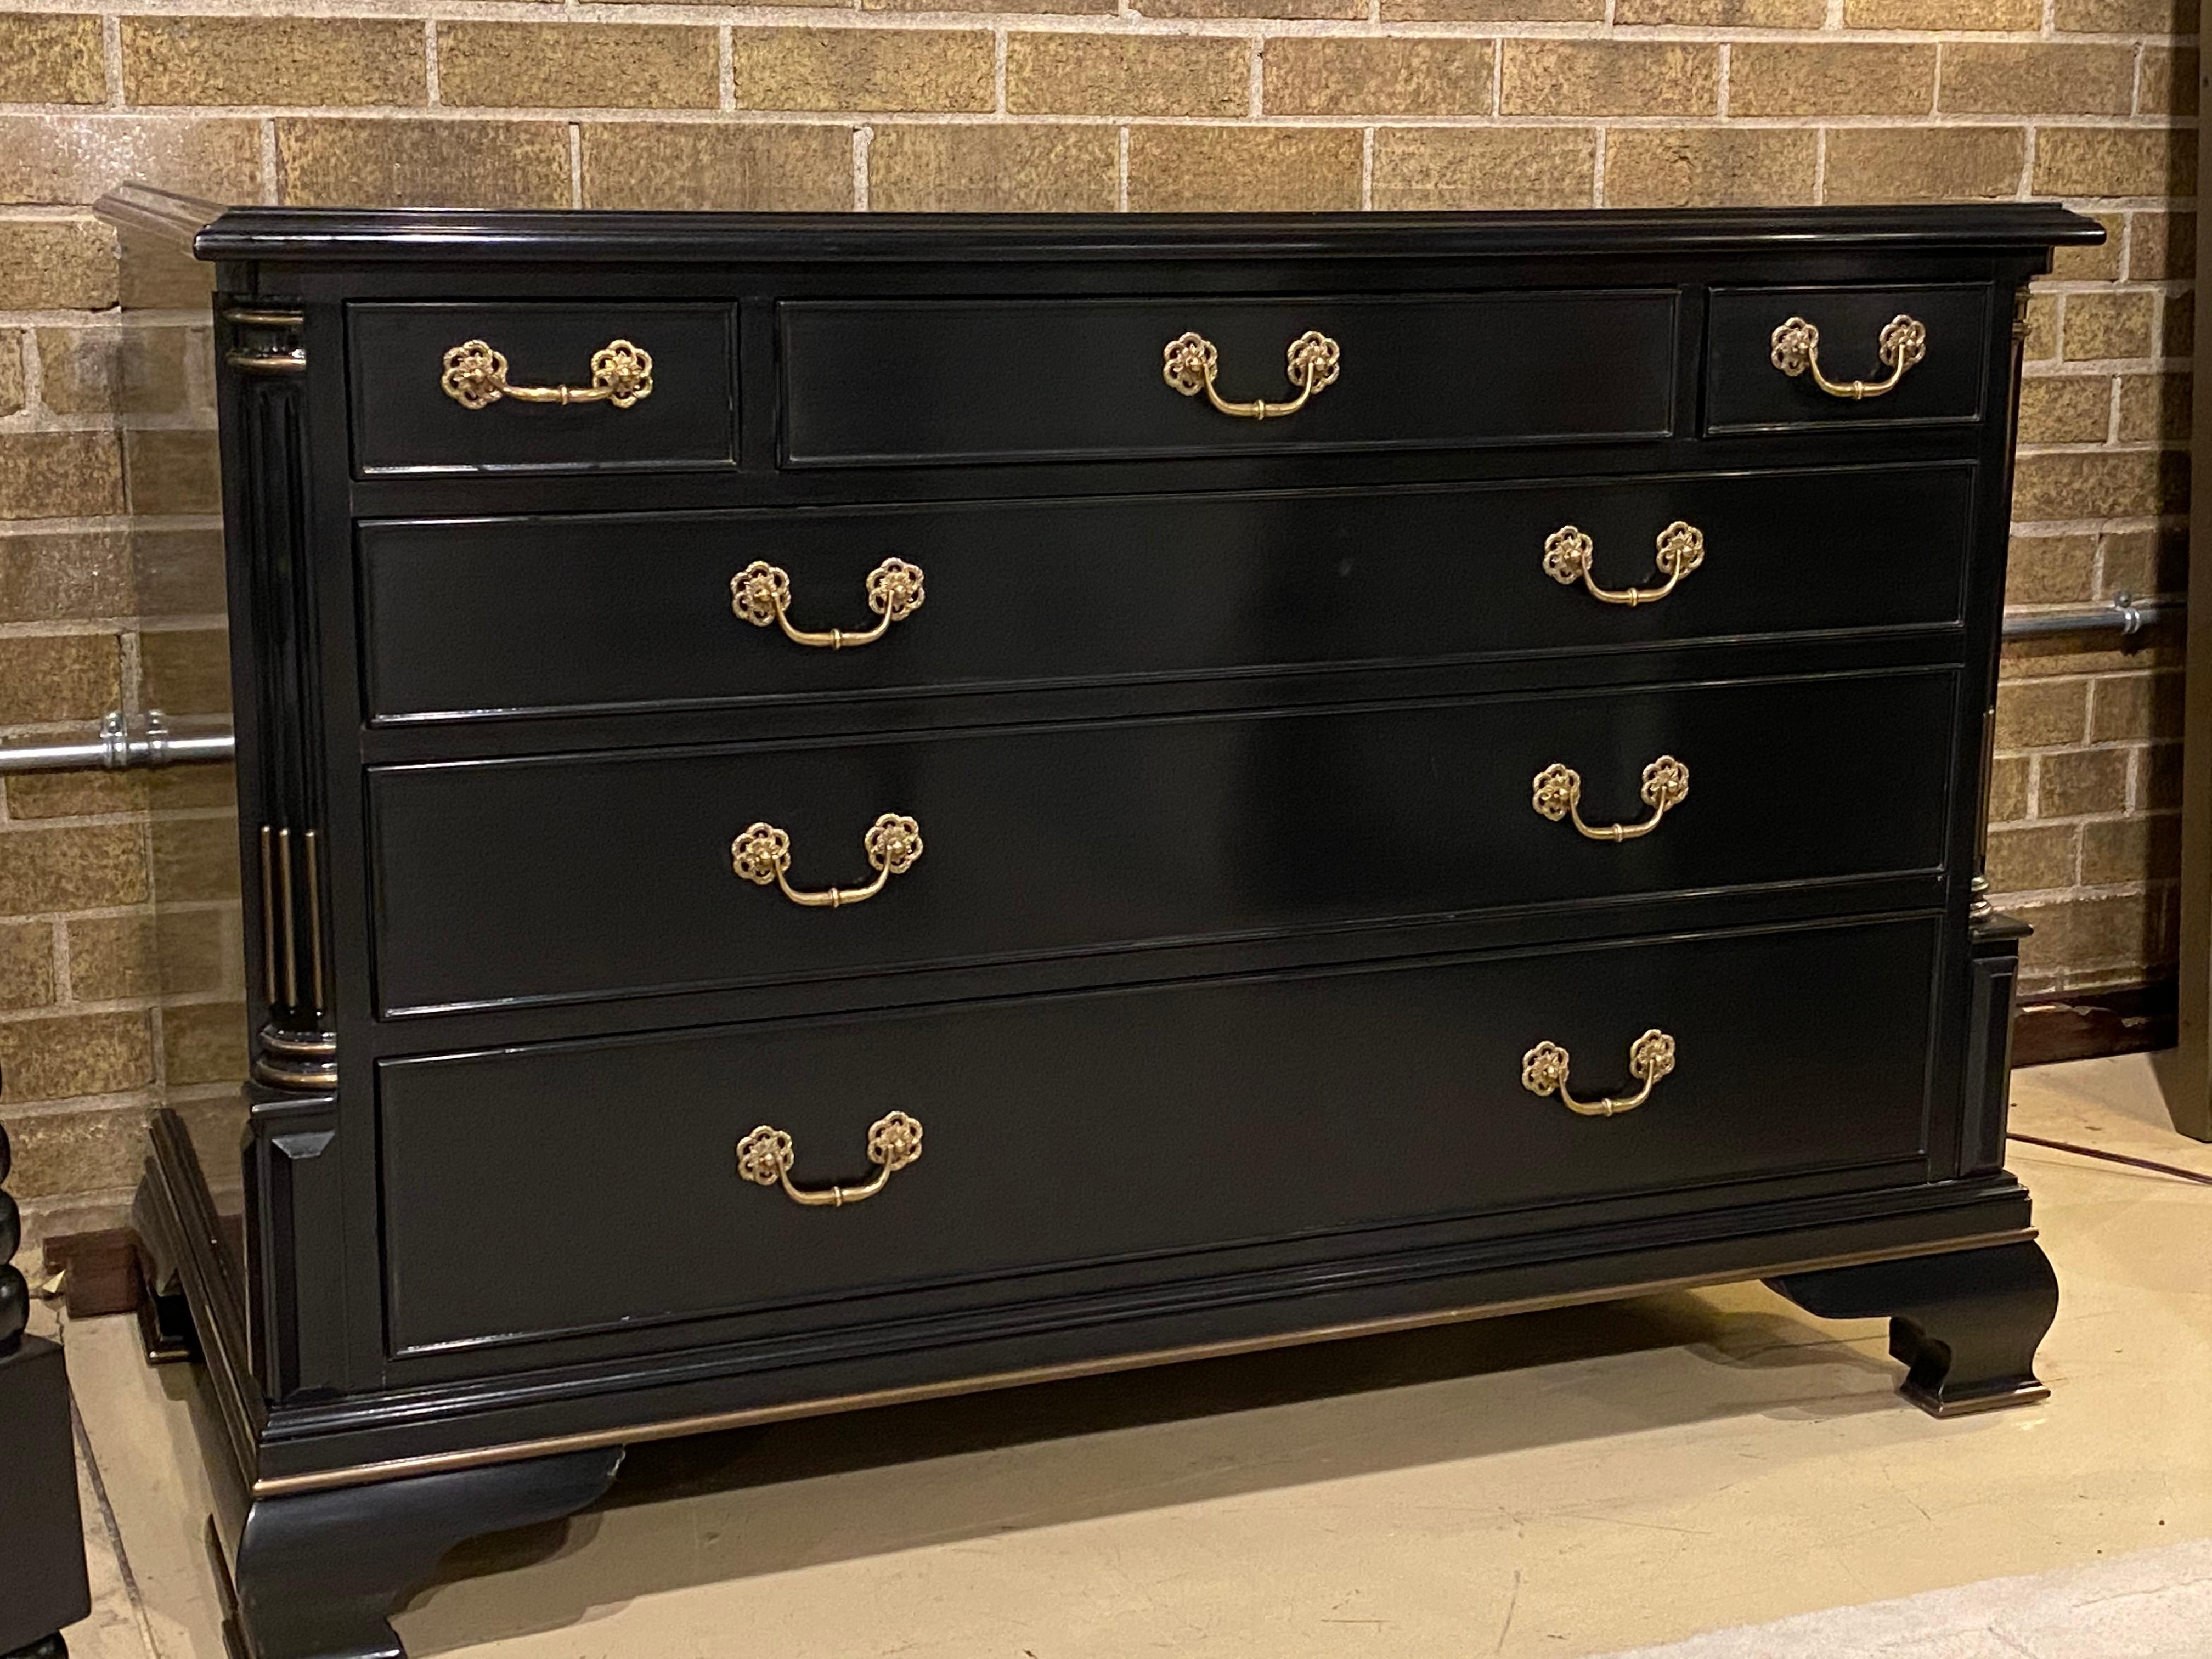 A low chest finished in black with gold accents. From the Ralph Lauren Collection by Century Furniture
This chest has six drawers, a bank of three draws across the top and three double drawers below.
Fluted corner pilasters.